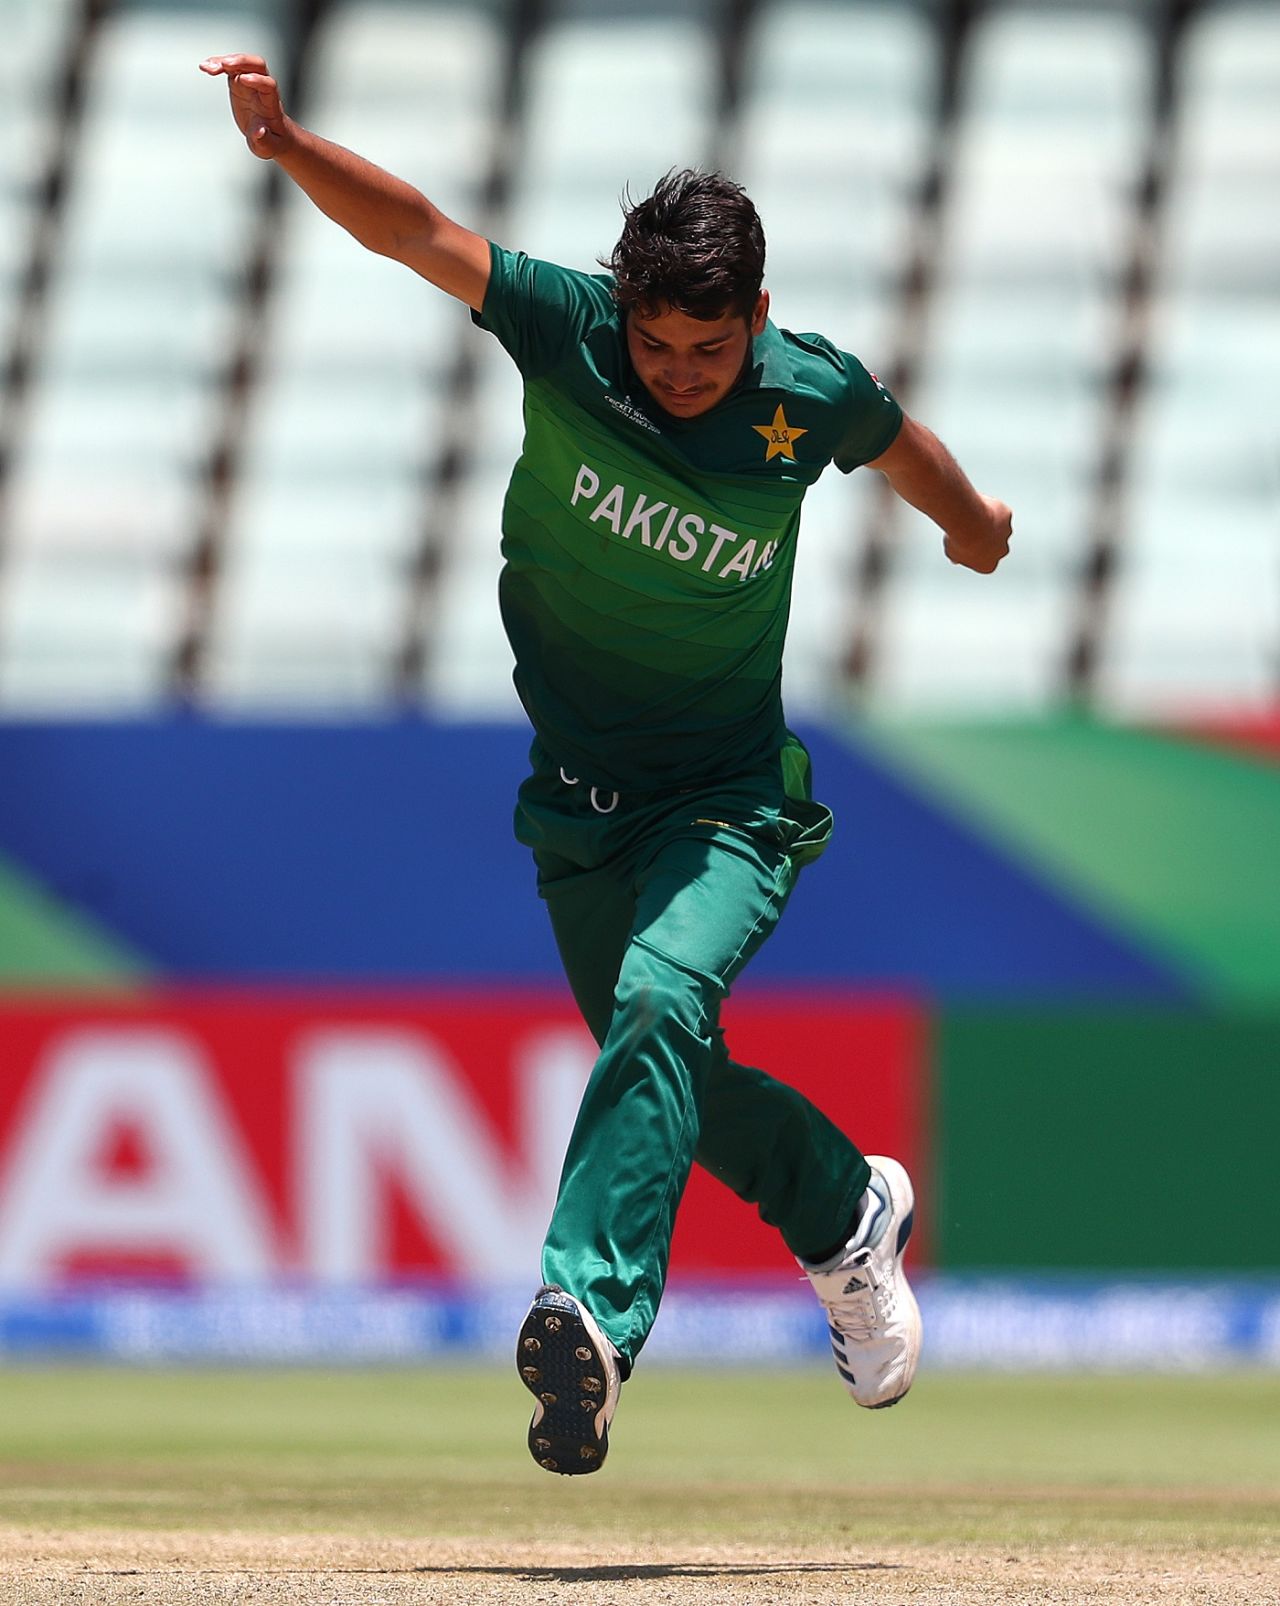 Mohammad Amir Khan is delighted after taking a wicket, Afghanistan U-19 v Pakistan U-19, Super League quarter-final, Under-19 World Cup, Benoni, January 31, 2020